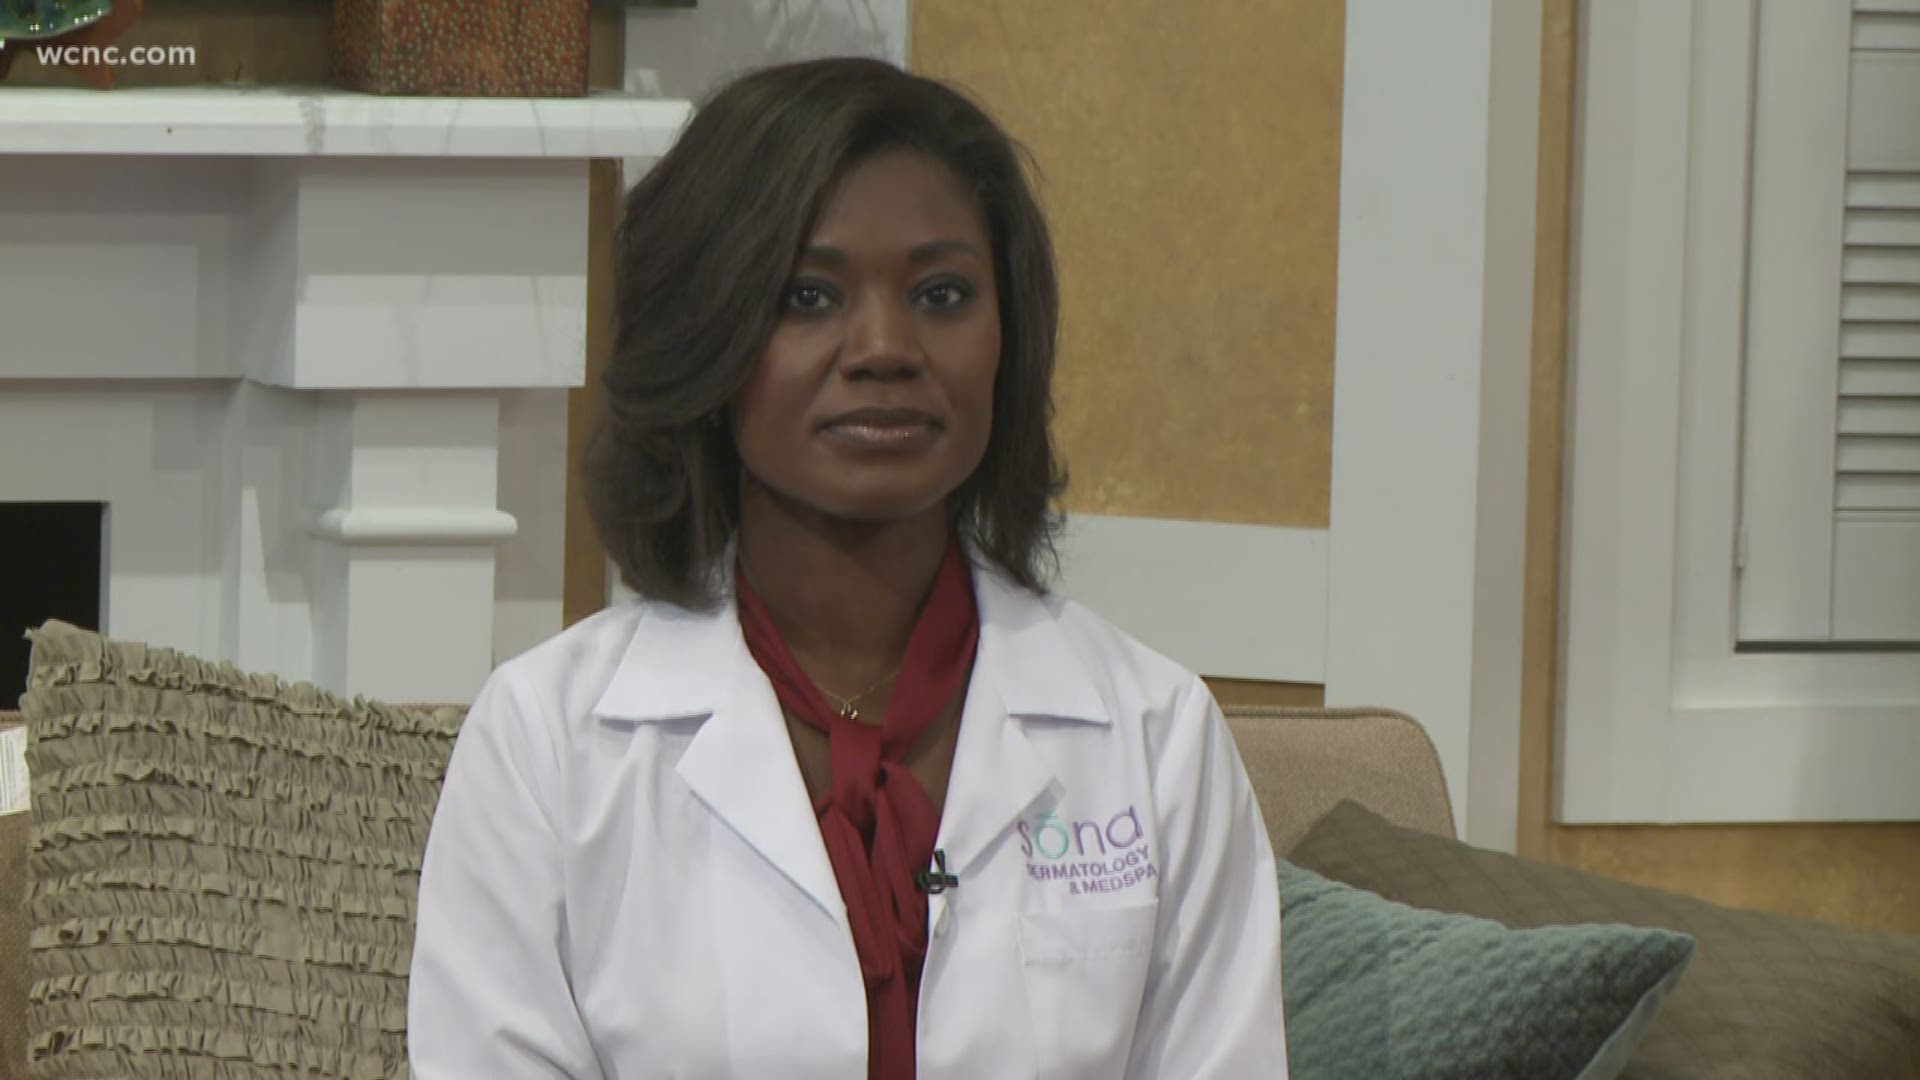 Doctor Ronea Chambers with Sona Dermatology and Med Spa explains the importance of taking care of your skin.